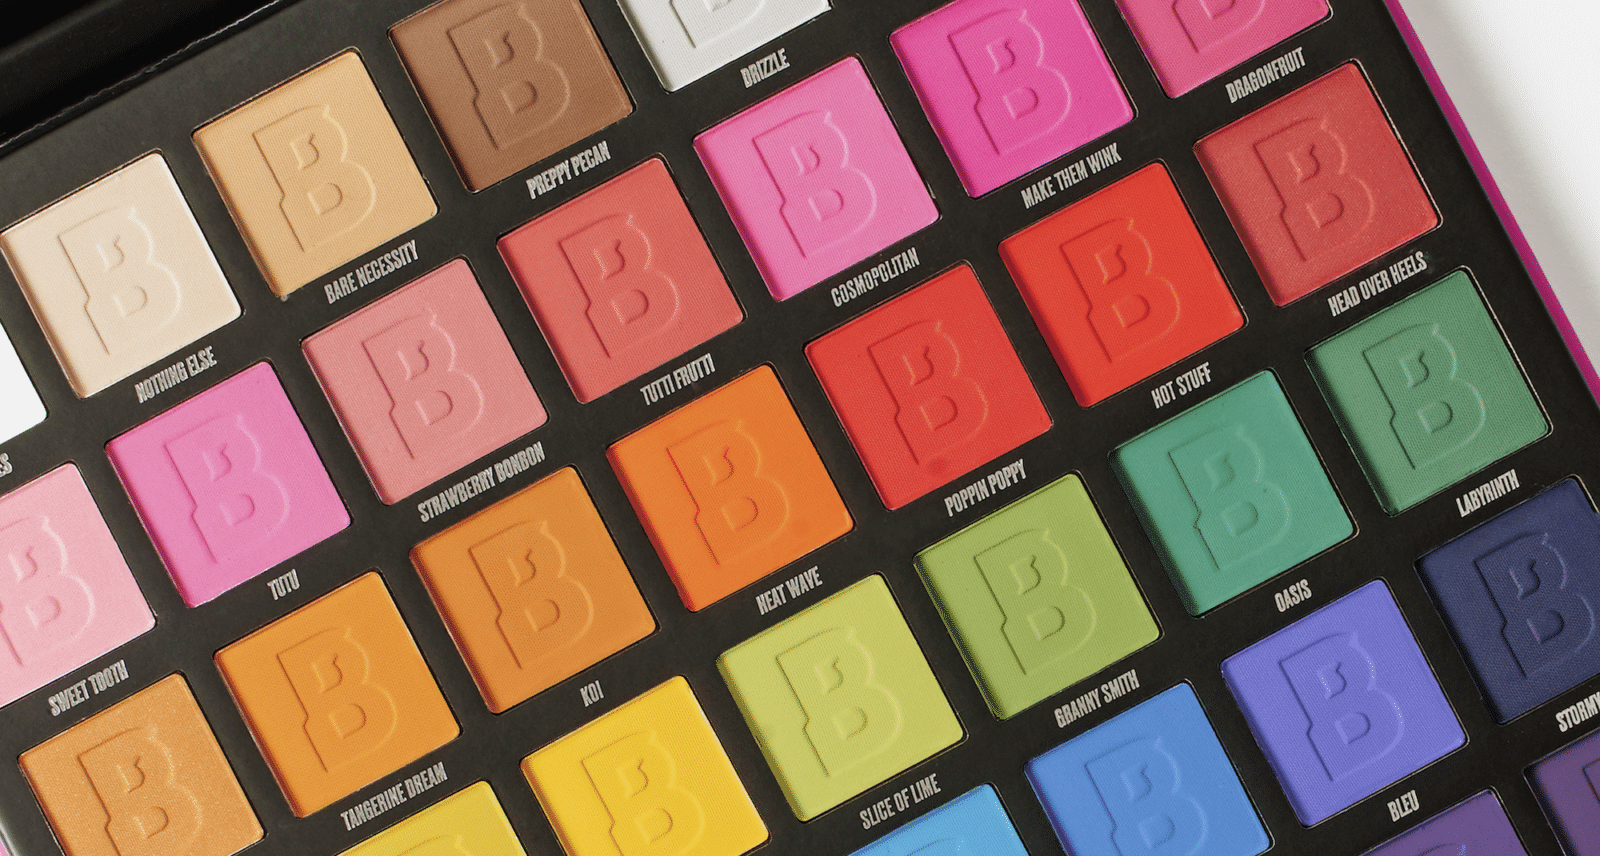 Indie Beauty Brands: 5 Colourful Eyeshadow Palettes I Want Desperately